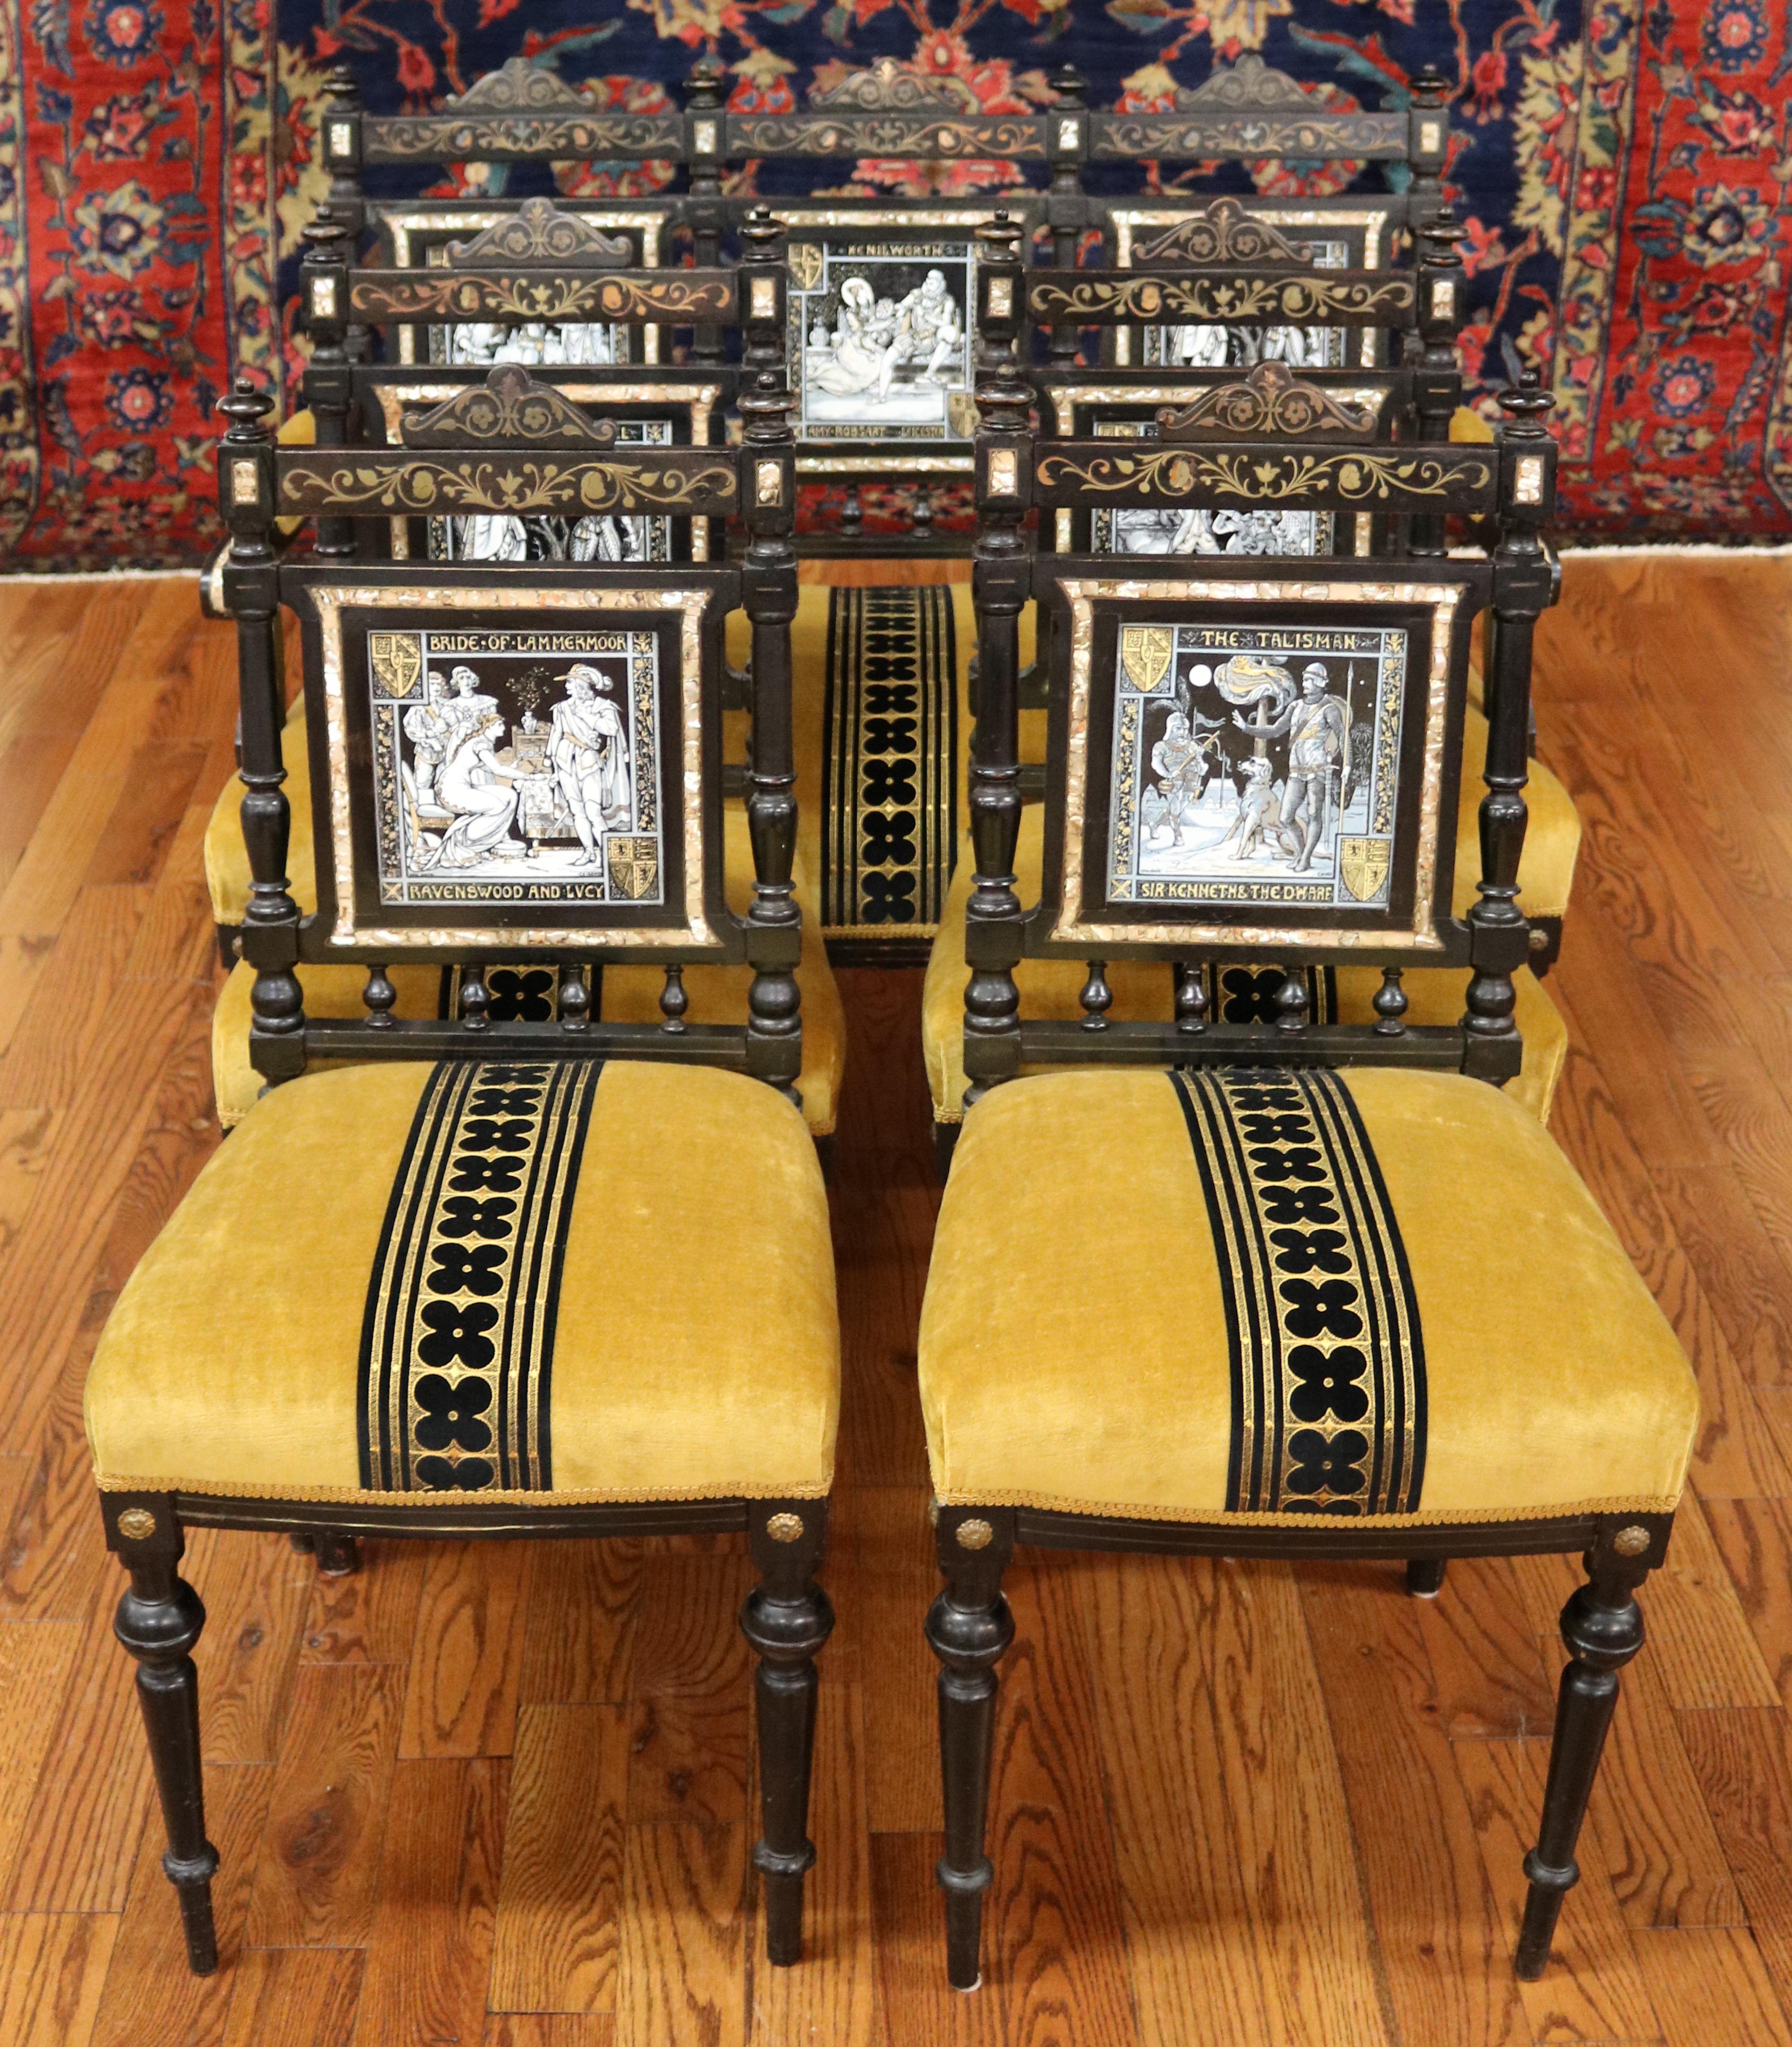 This parlor set was designed by John Moyr Smith in the 19th century UK. The panels are made by Minton designed by John Moyr Smith. The panels are excellently made and the chairs are amazingly carved! Two similar chairs made by John Moyr Smith are in